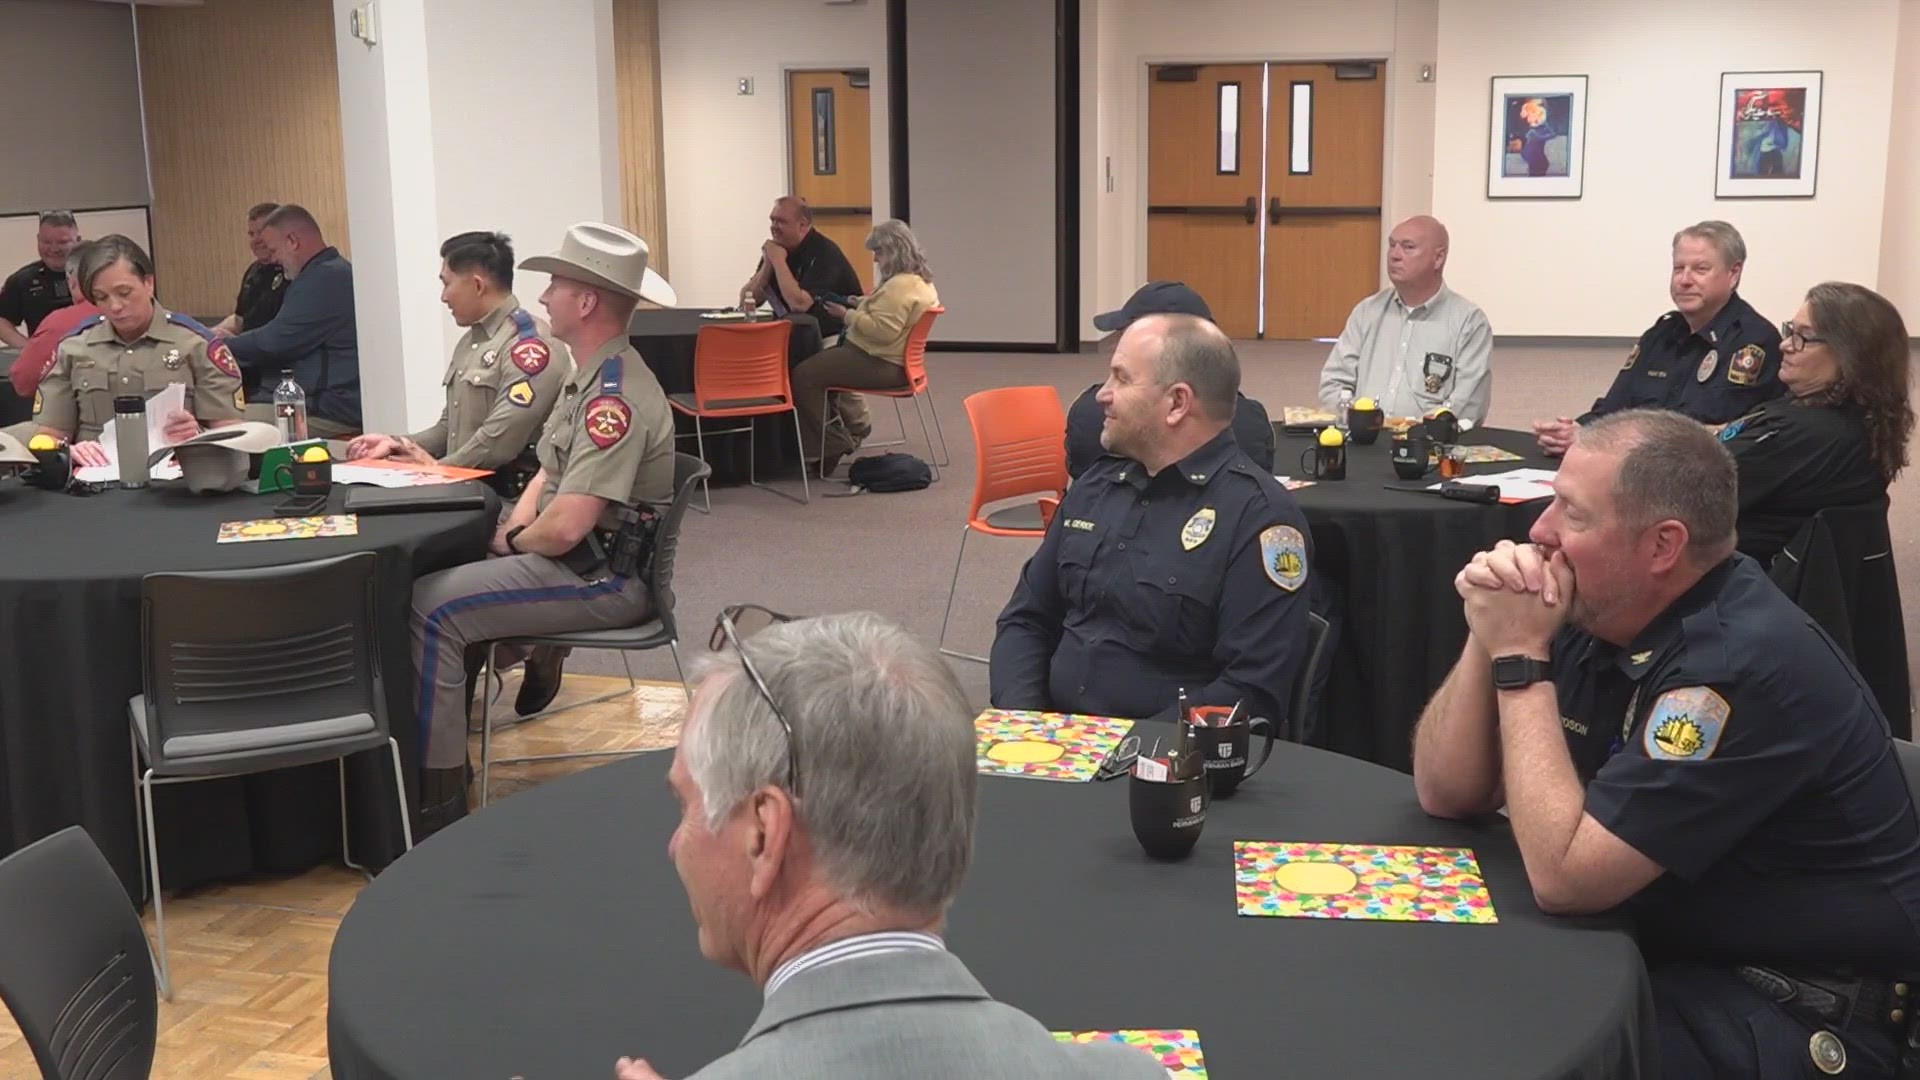 Several politicians and representatives from different organizations were in attendance for the council, as current issues facing law enforcement were discussed.